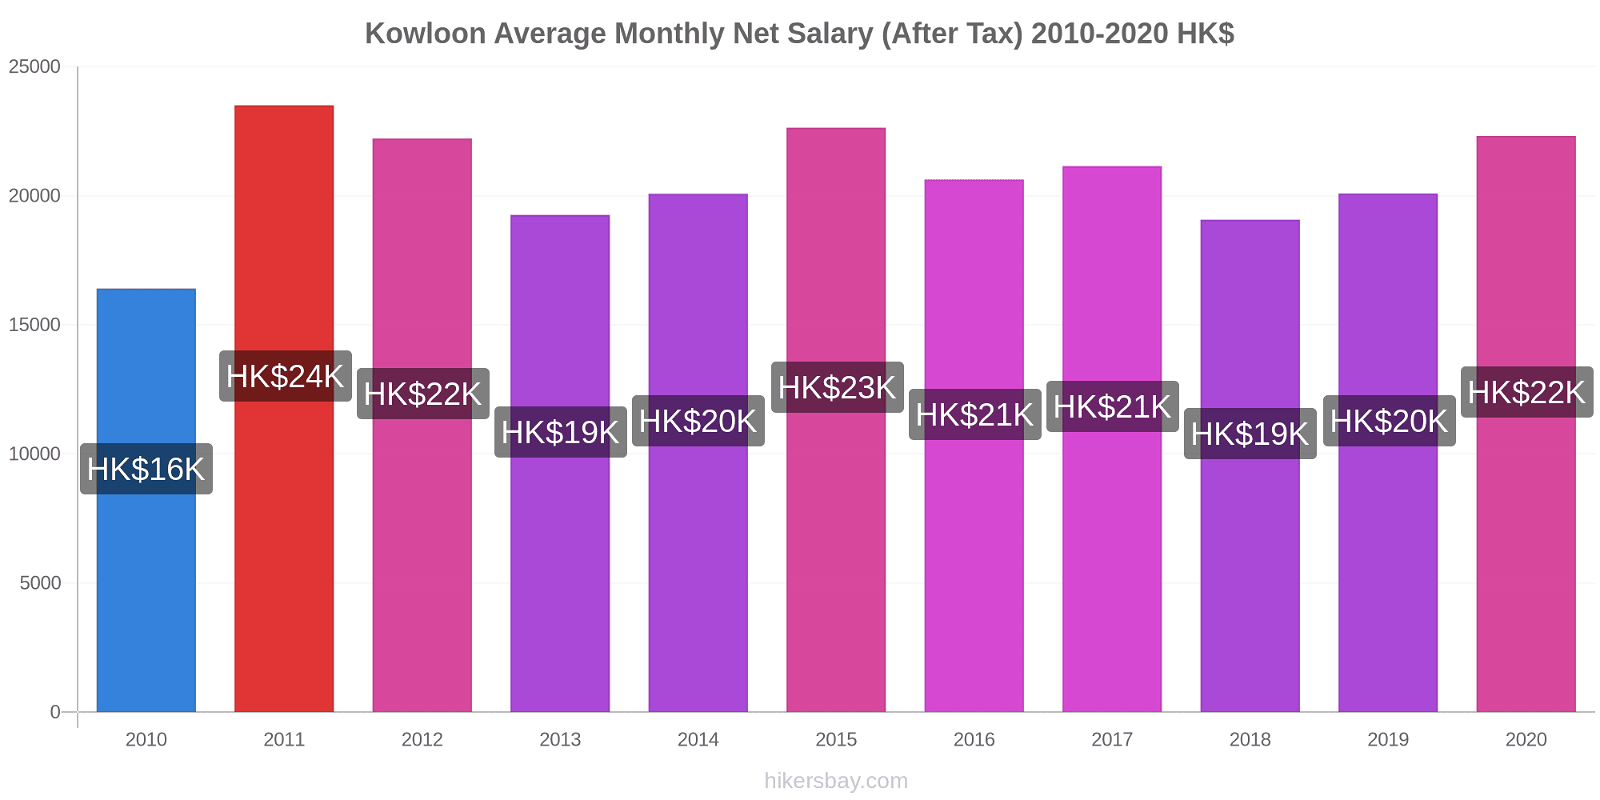 Kowloon price changes Average Monthly Net Salary (After Tax) hikersbay.com